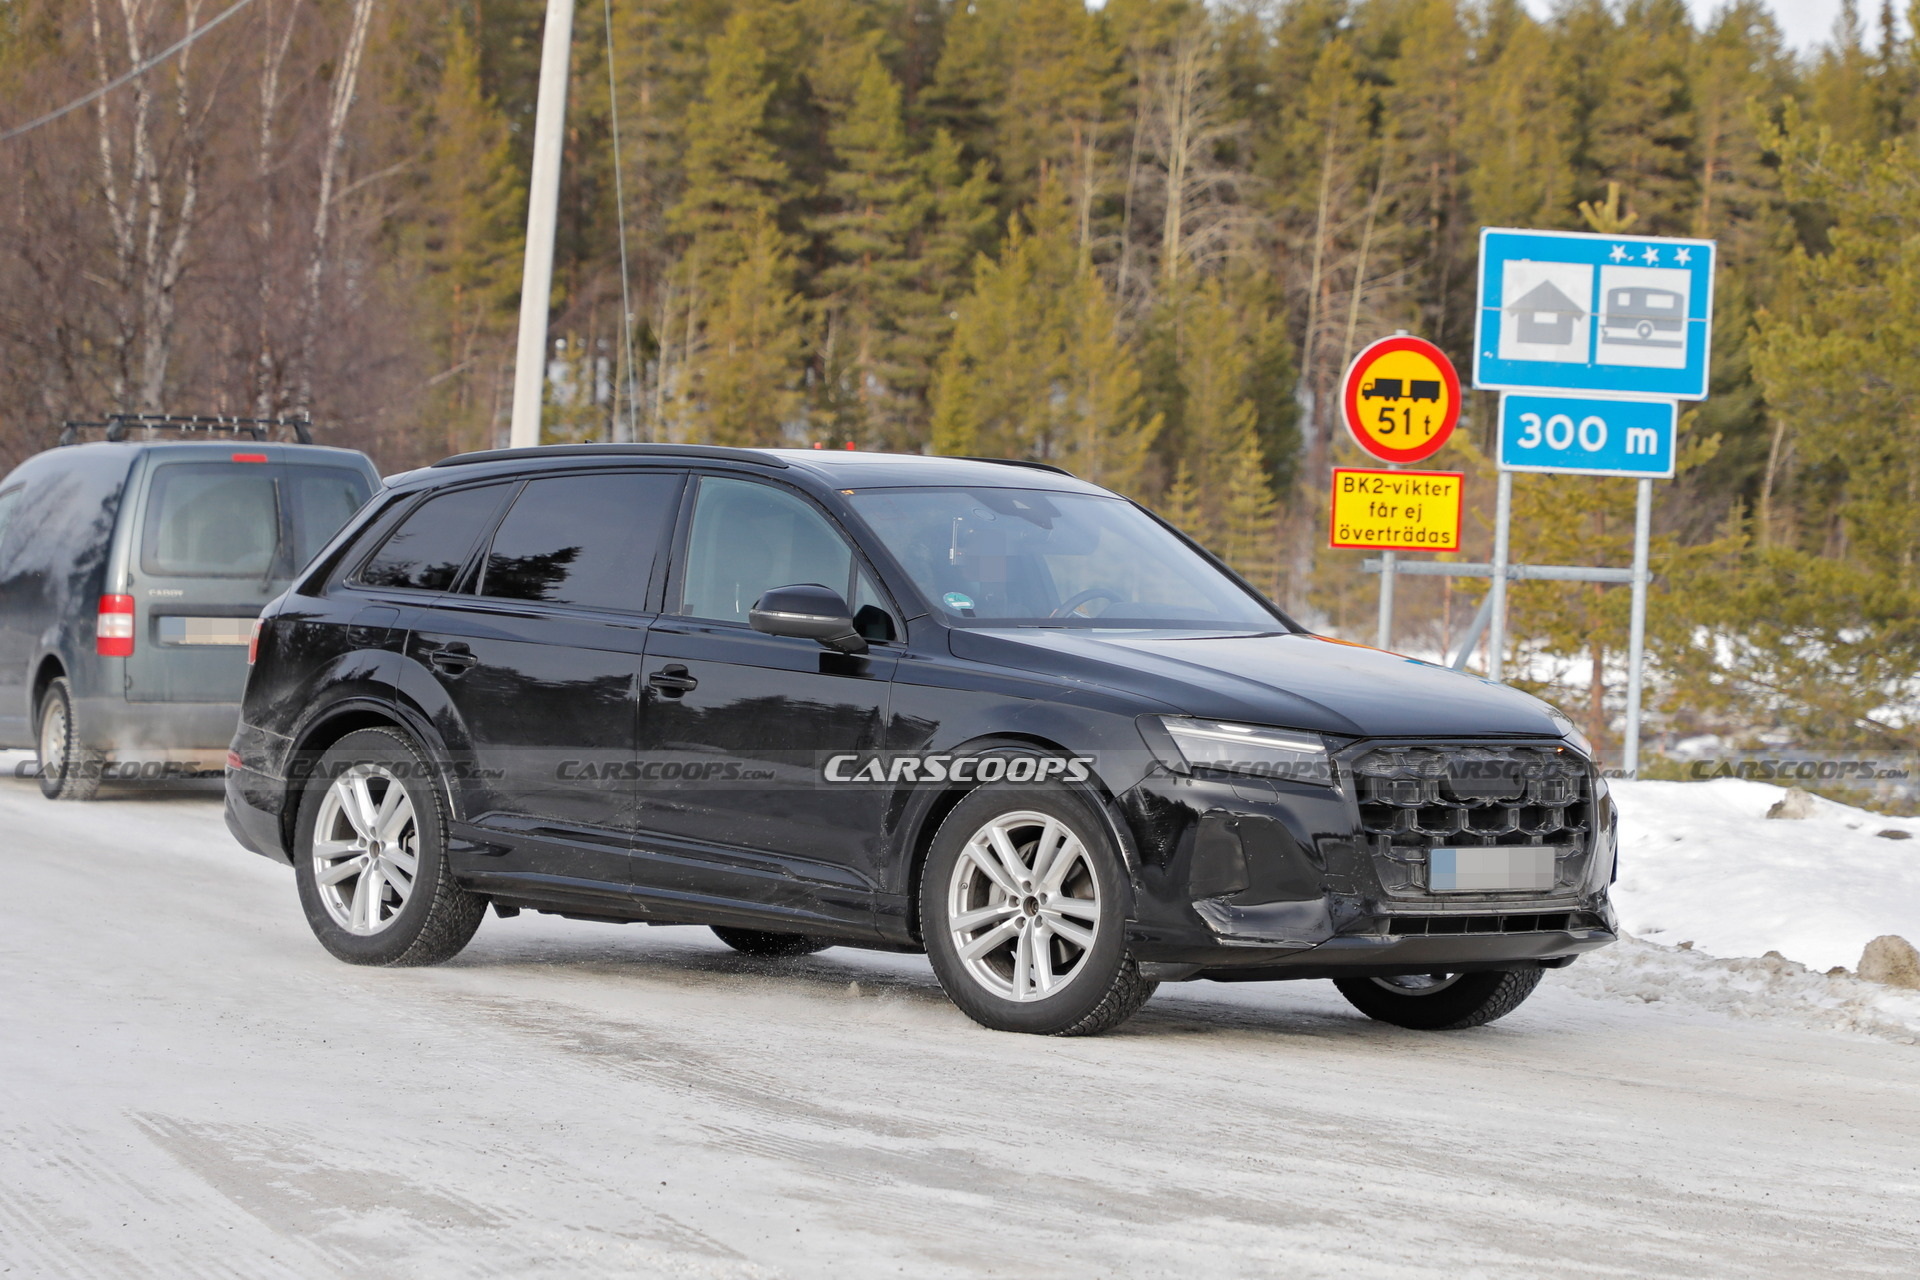 Audi Q7 facelift bookings open ahead of its launch this month